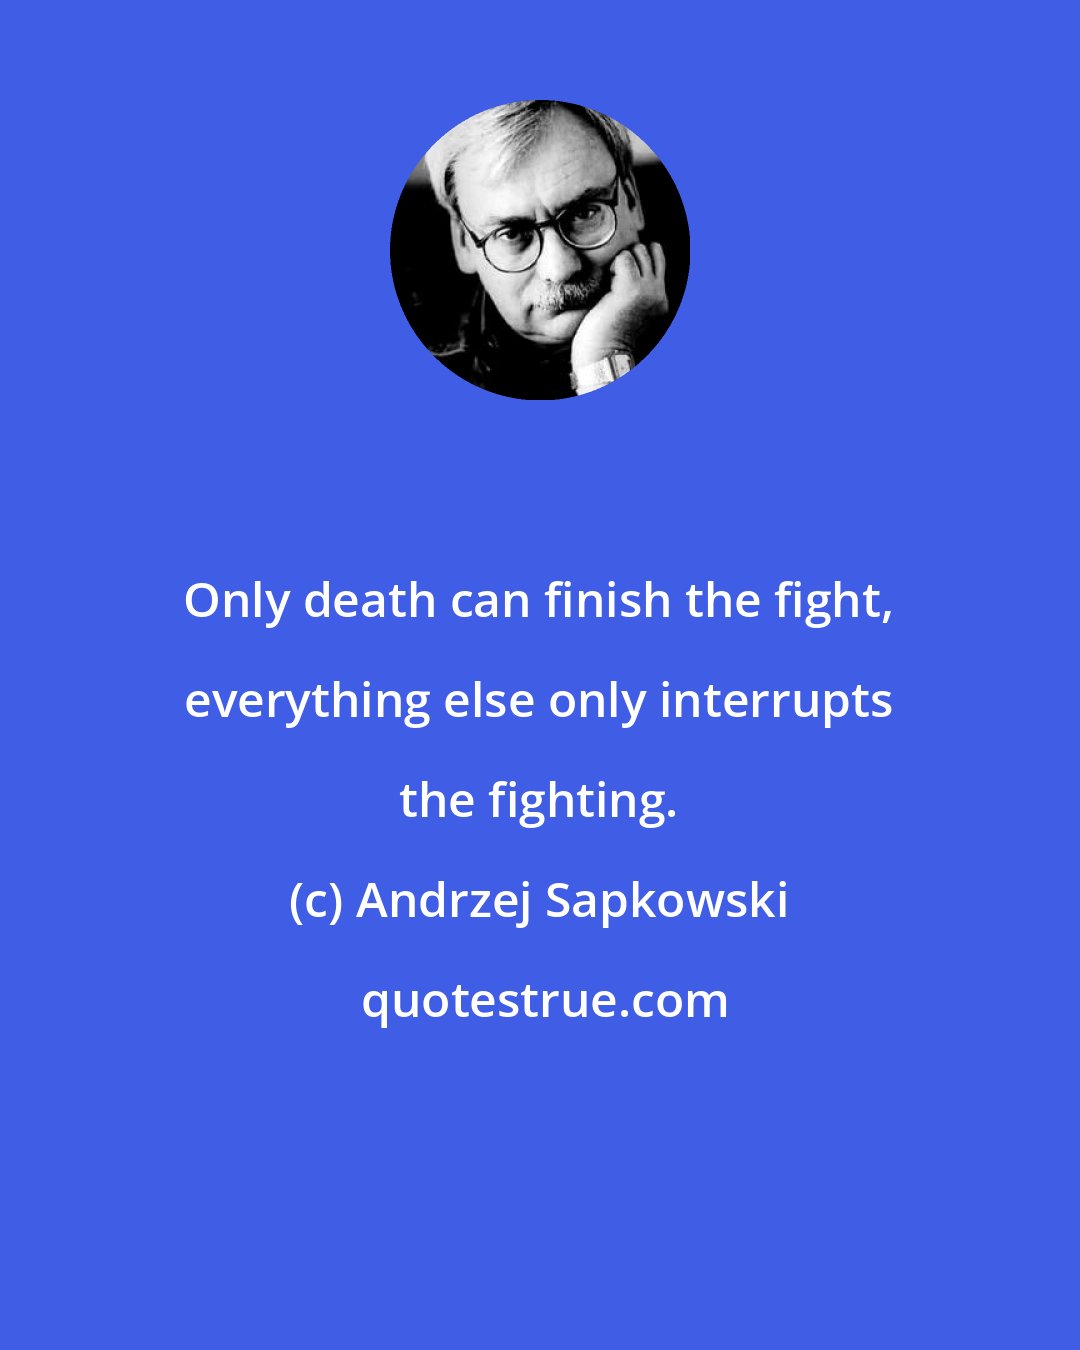 Andrzej Sapkowski: Only death can finish the fight, everything else only interrupts the fighting.